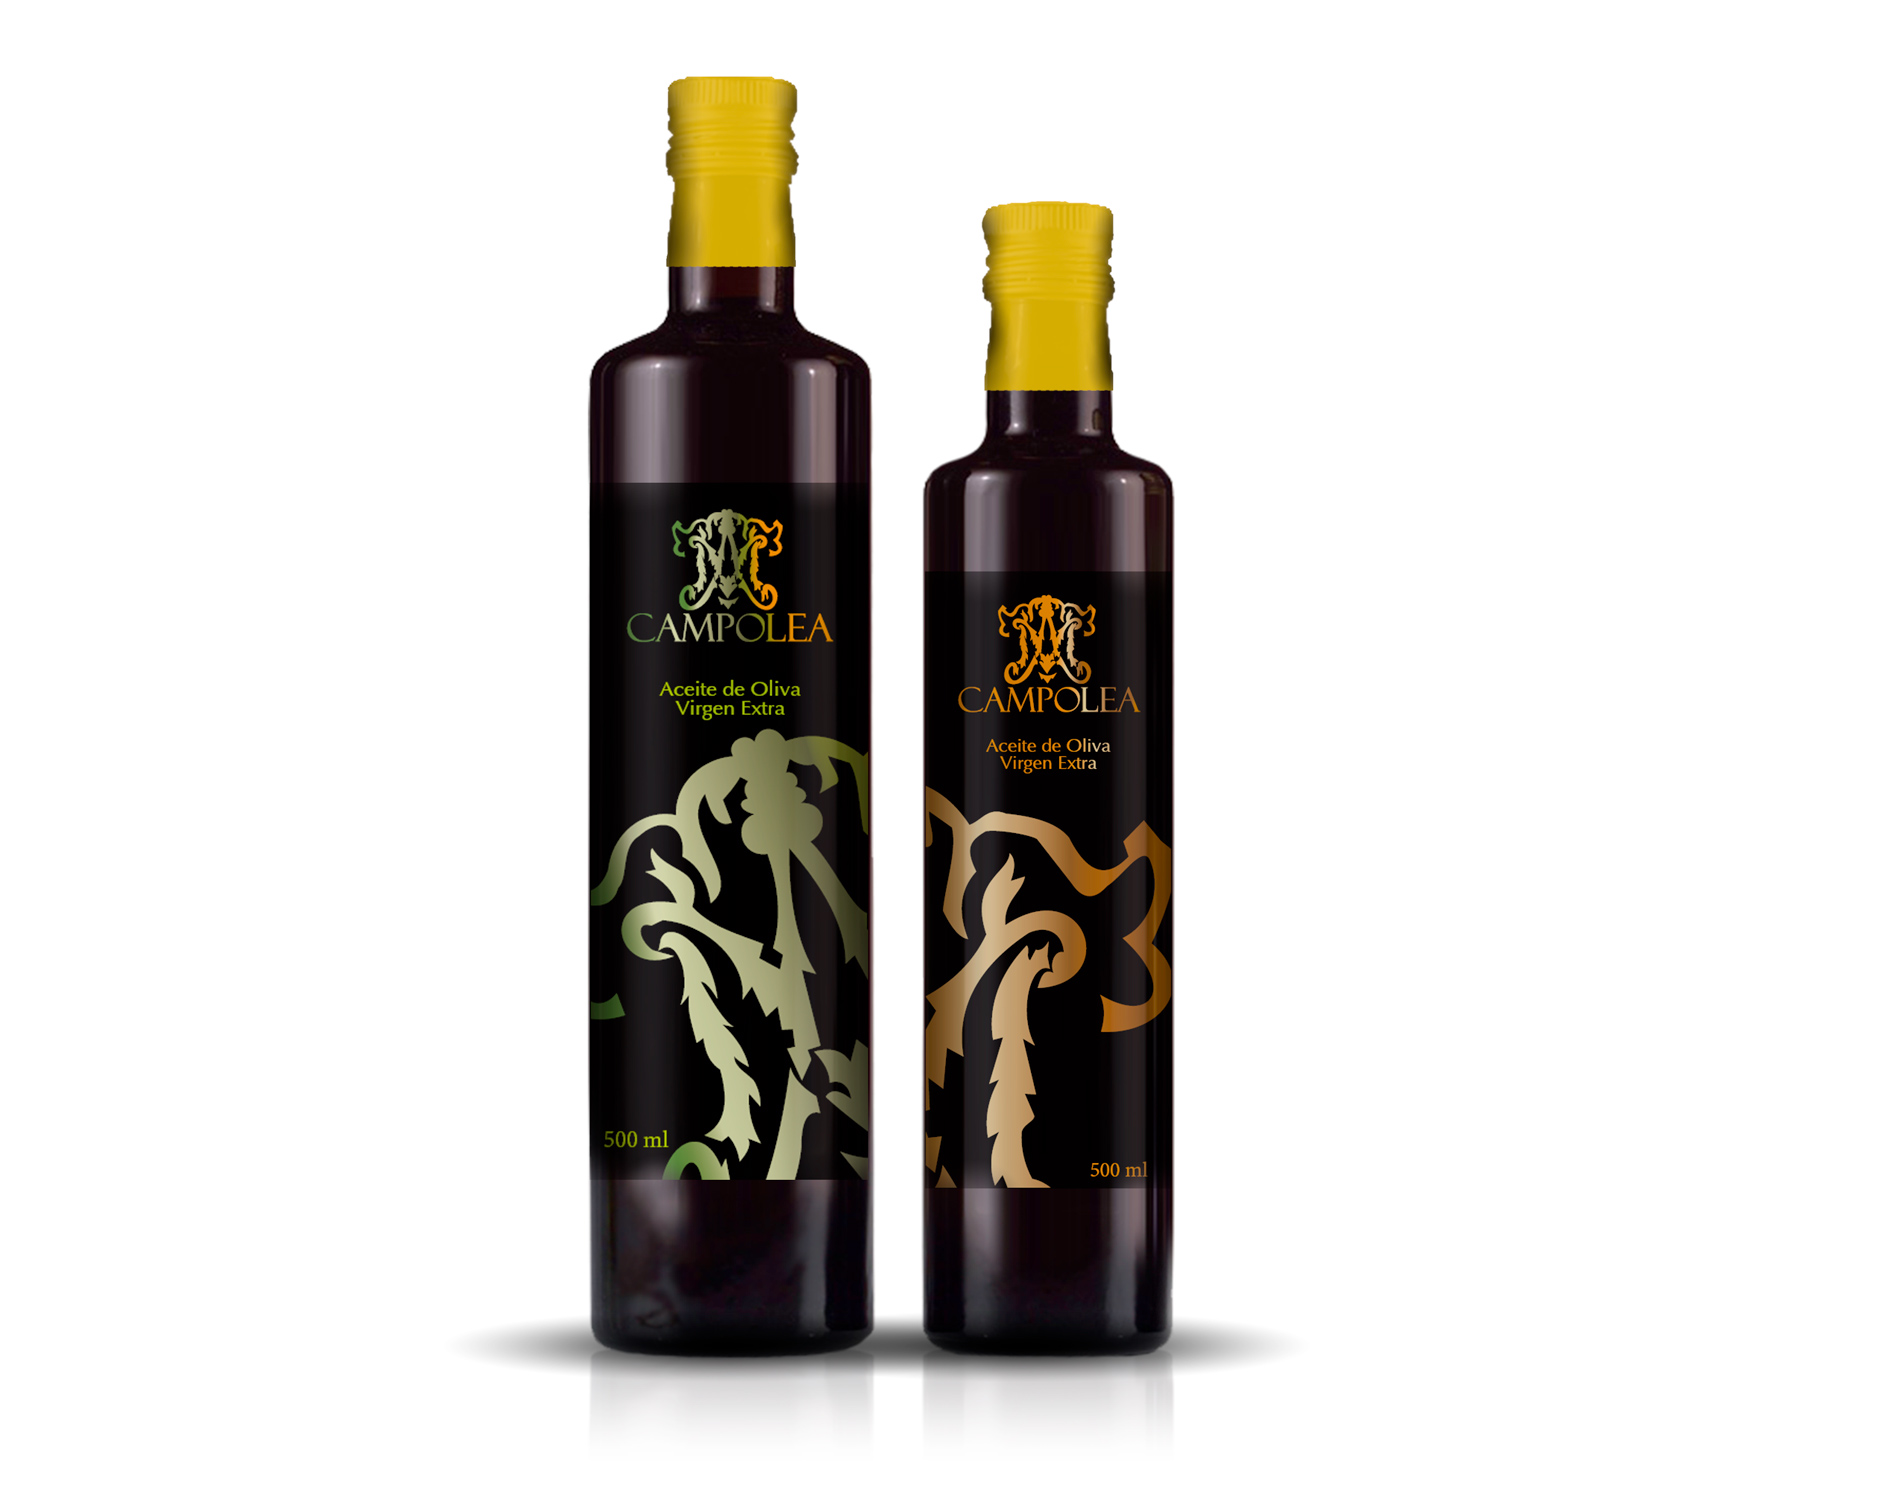 Portfolio of graphic and creative design works of extra virgin olive oil label design and packaging for export to China and Asian countries CAMPOLEA